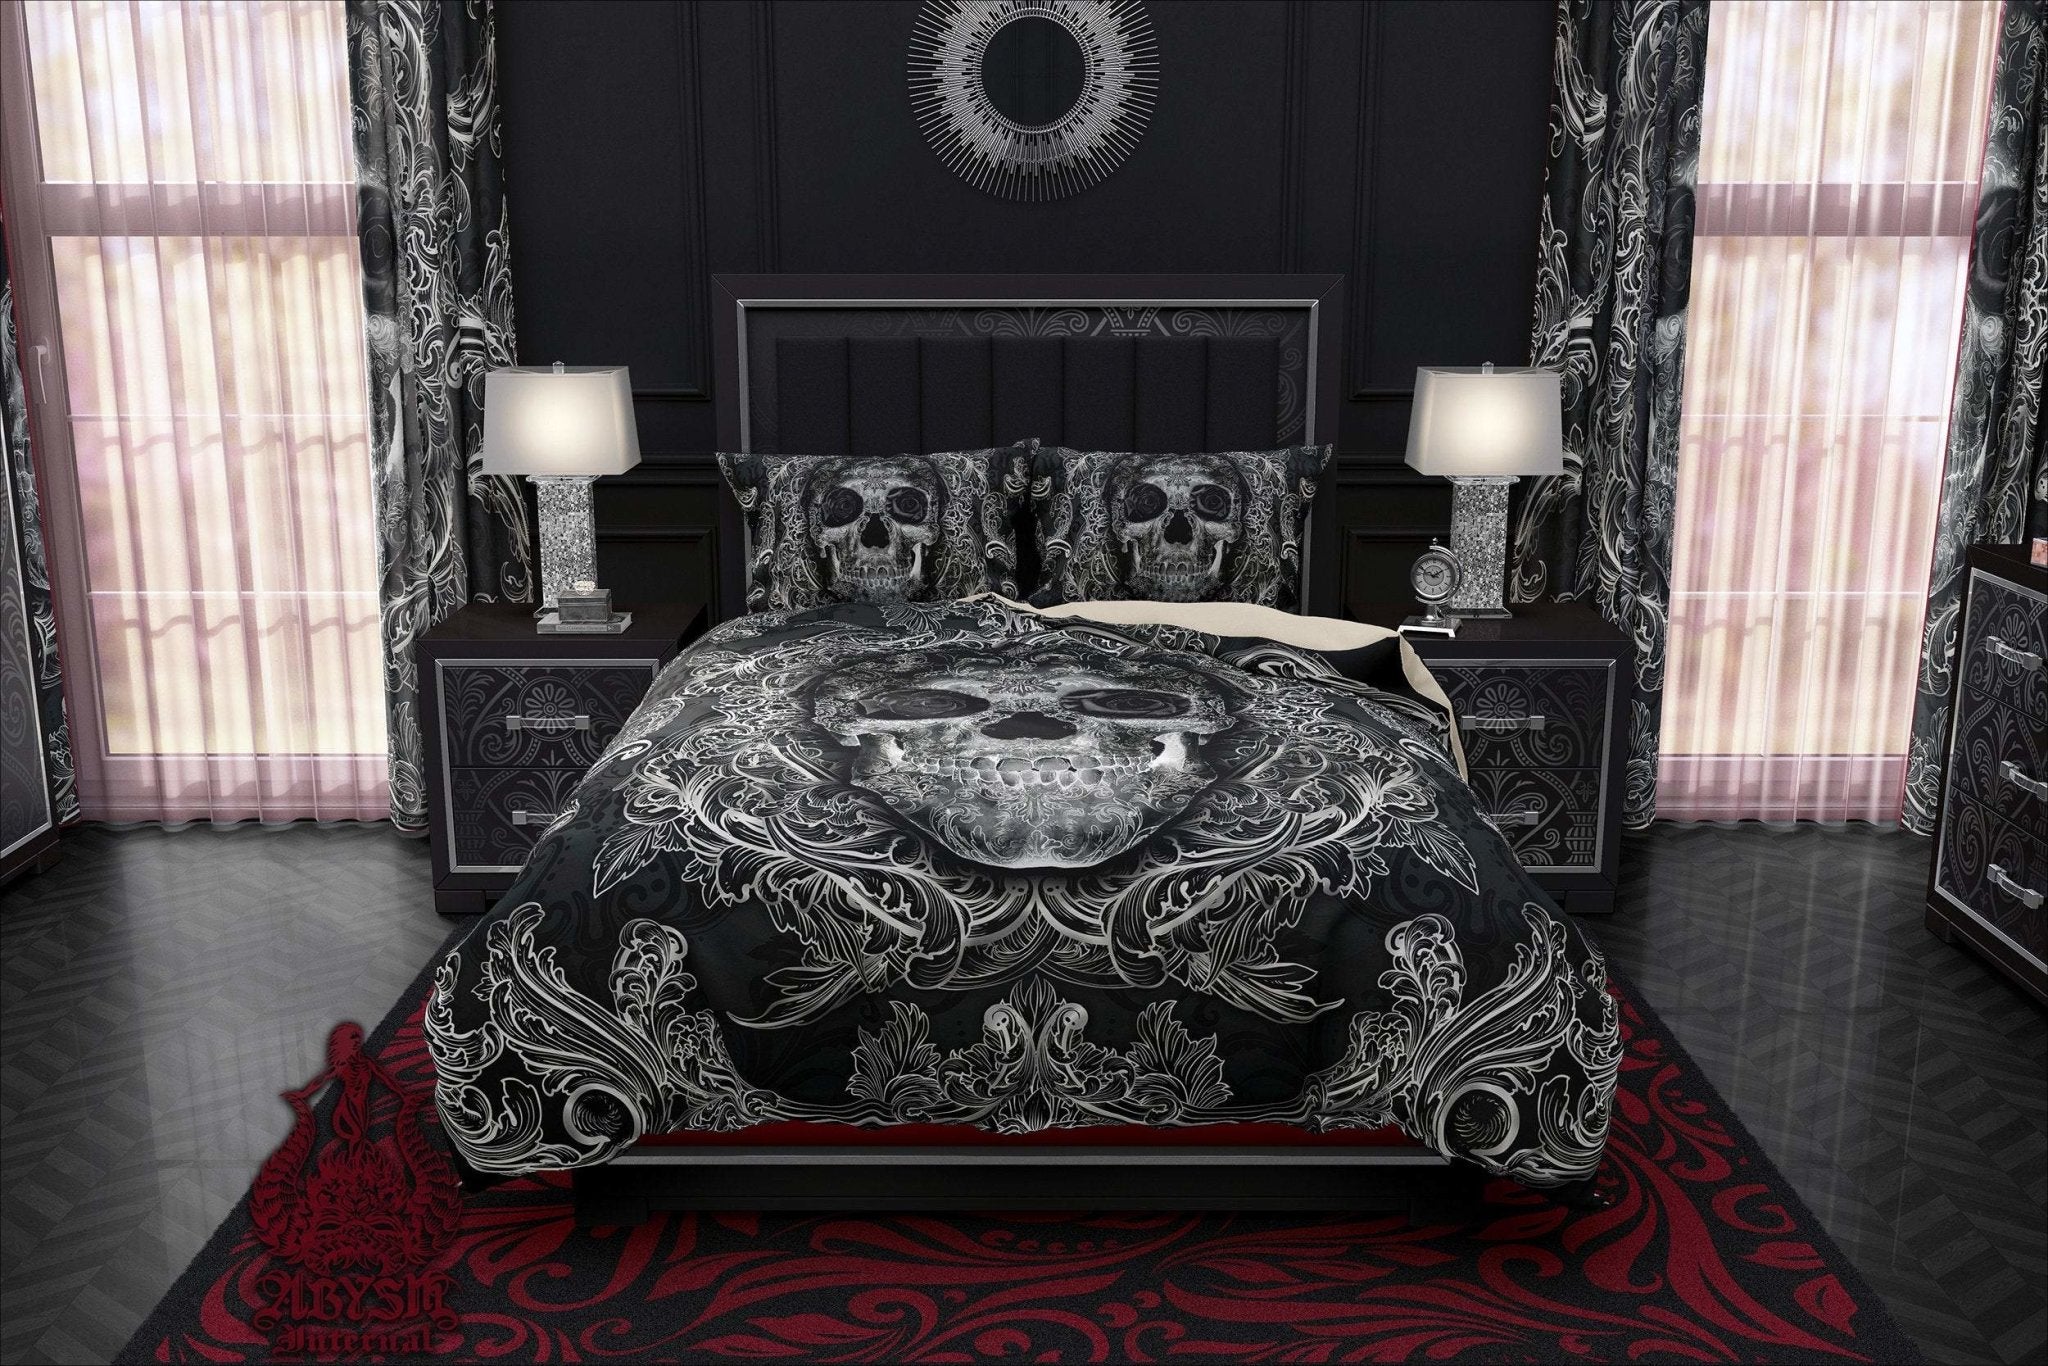 Skull Bedding Set, Comforter and Duvet, Gothic Bed Cover and Bedroom Decor, King, Queen and Twin Size - Goth Art, Dark - Abysm Internal